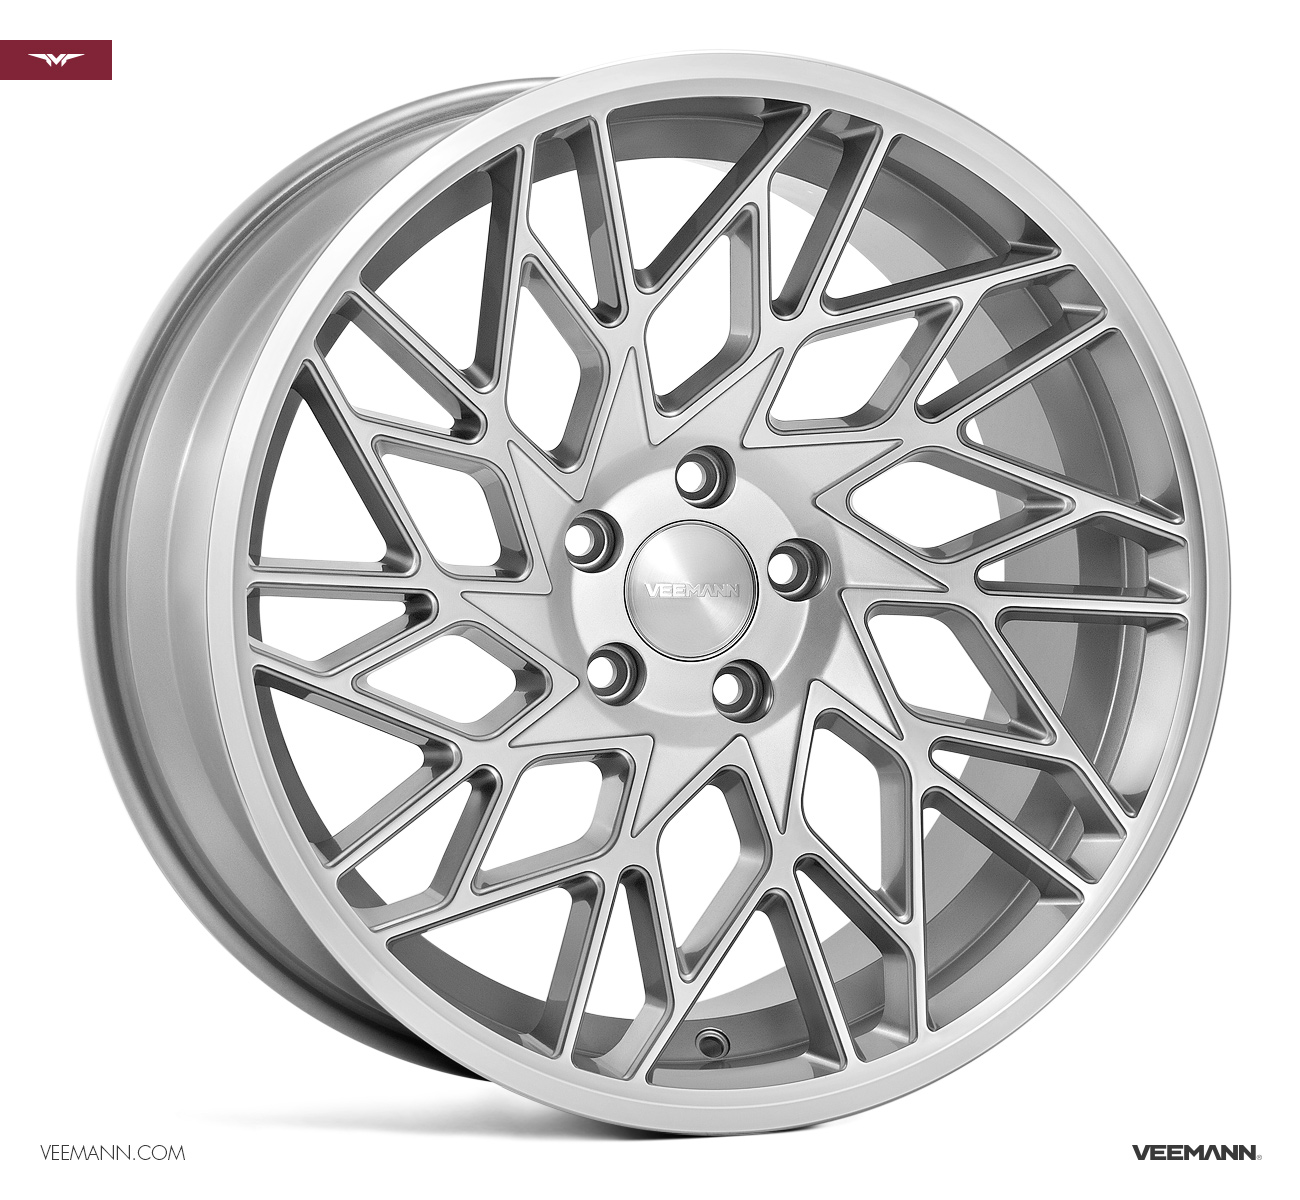 NEW 19" VEEMANN V-FS29R ALLOY WHEELS IN SILVER POL WITH WIDER 9.5" REARS